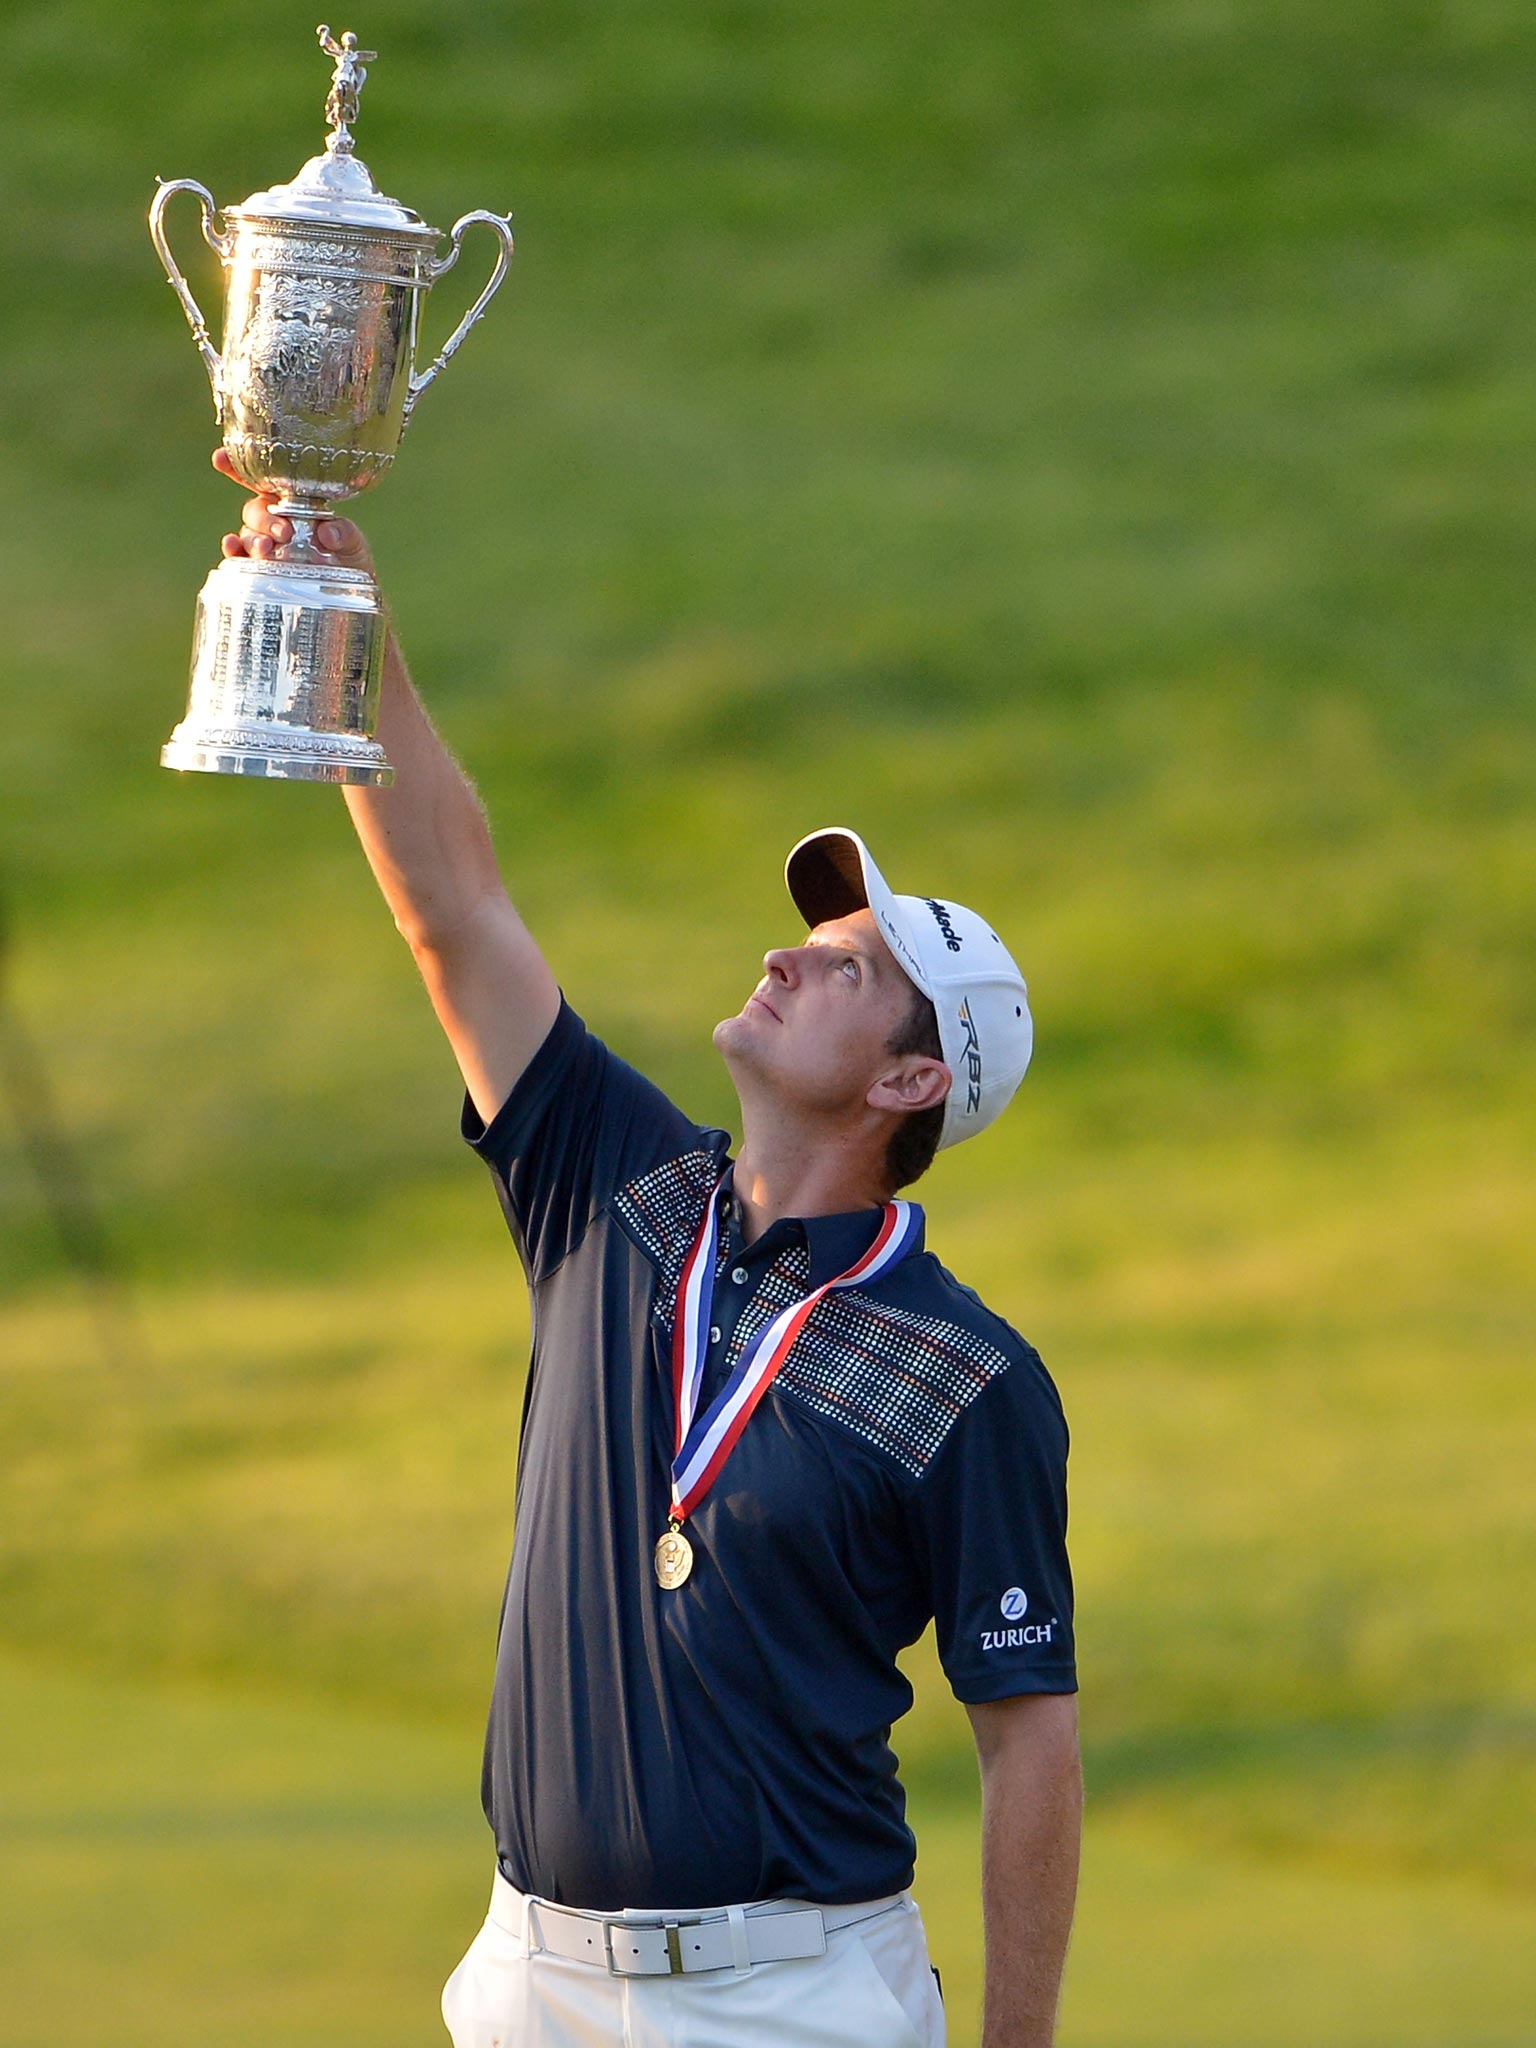 Justin Rose paid tribute to his late father Ken after winning the US Open last year